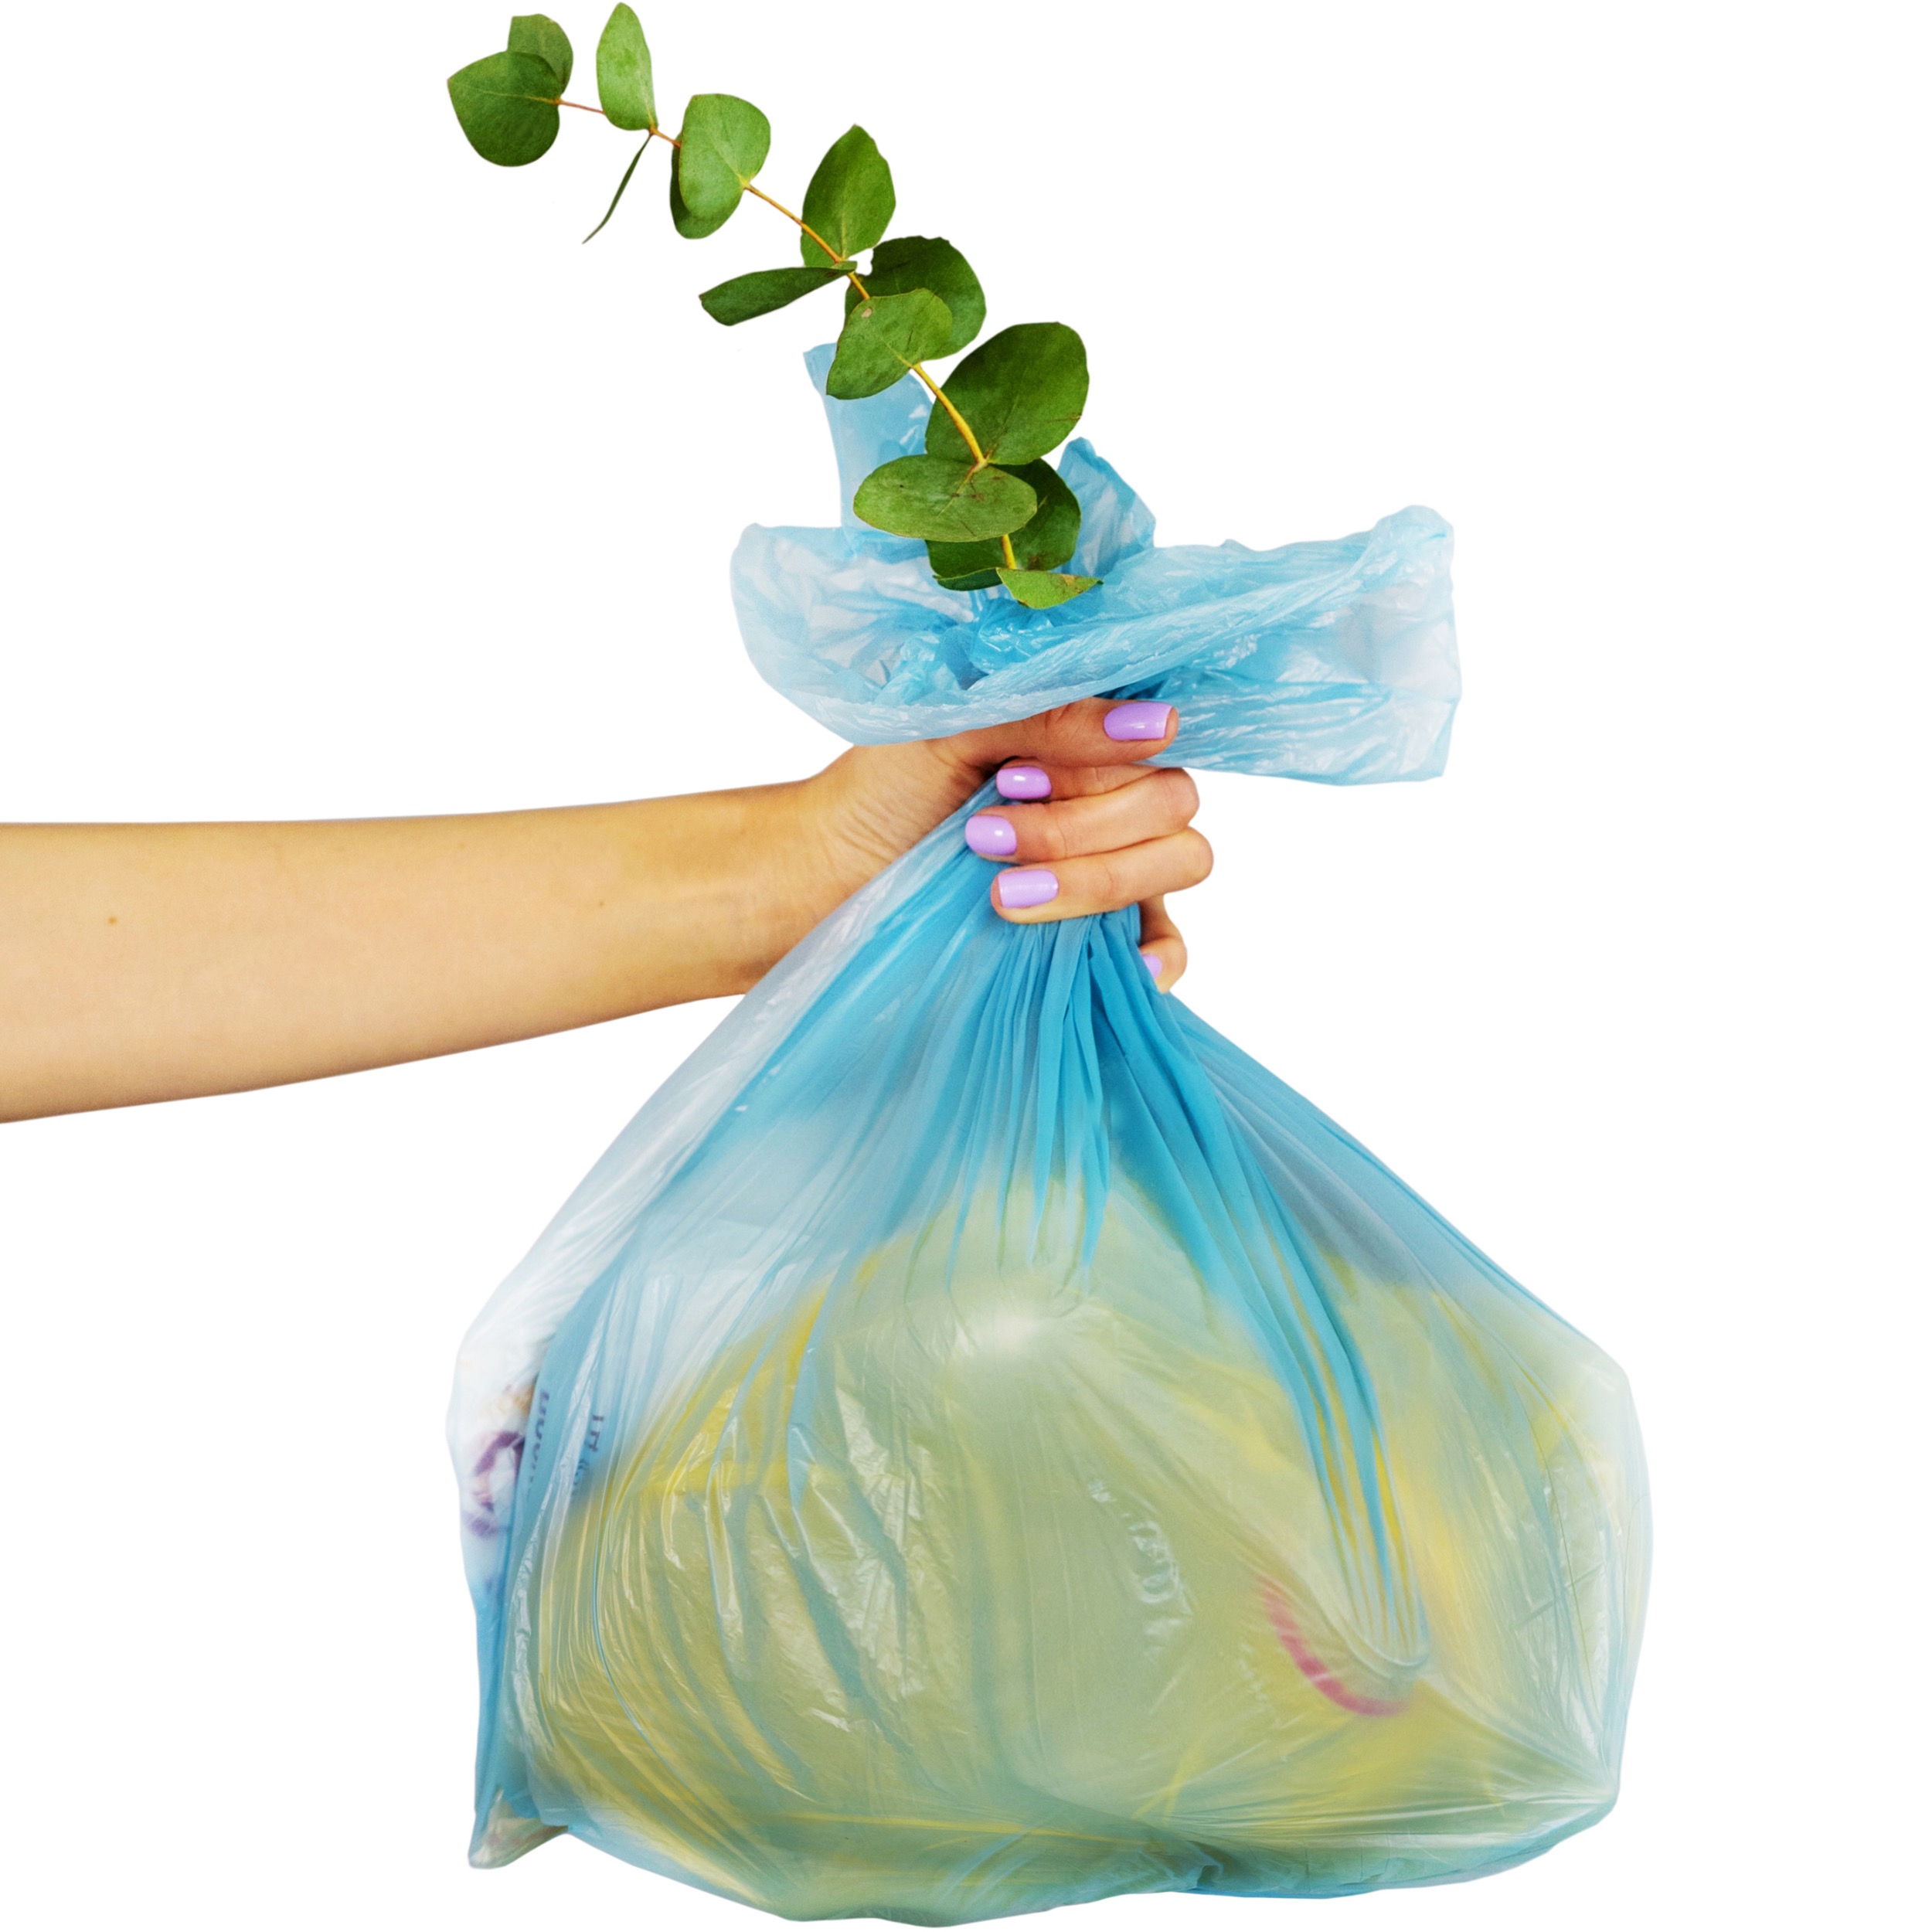 woman's hand holding a bag full of recycling with a green leafy plant coming out the top